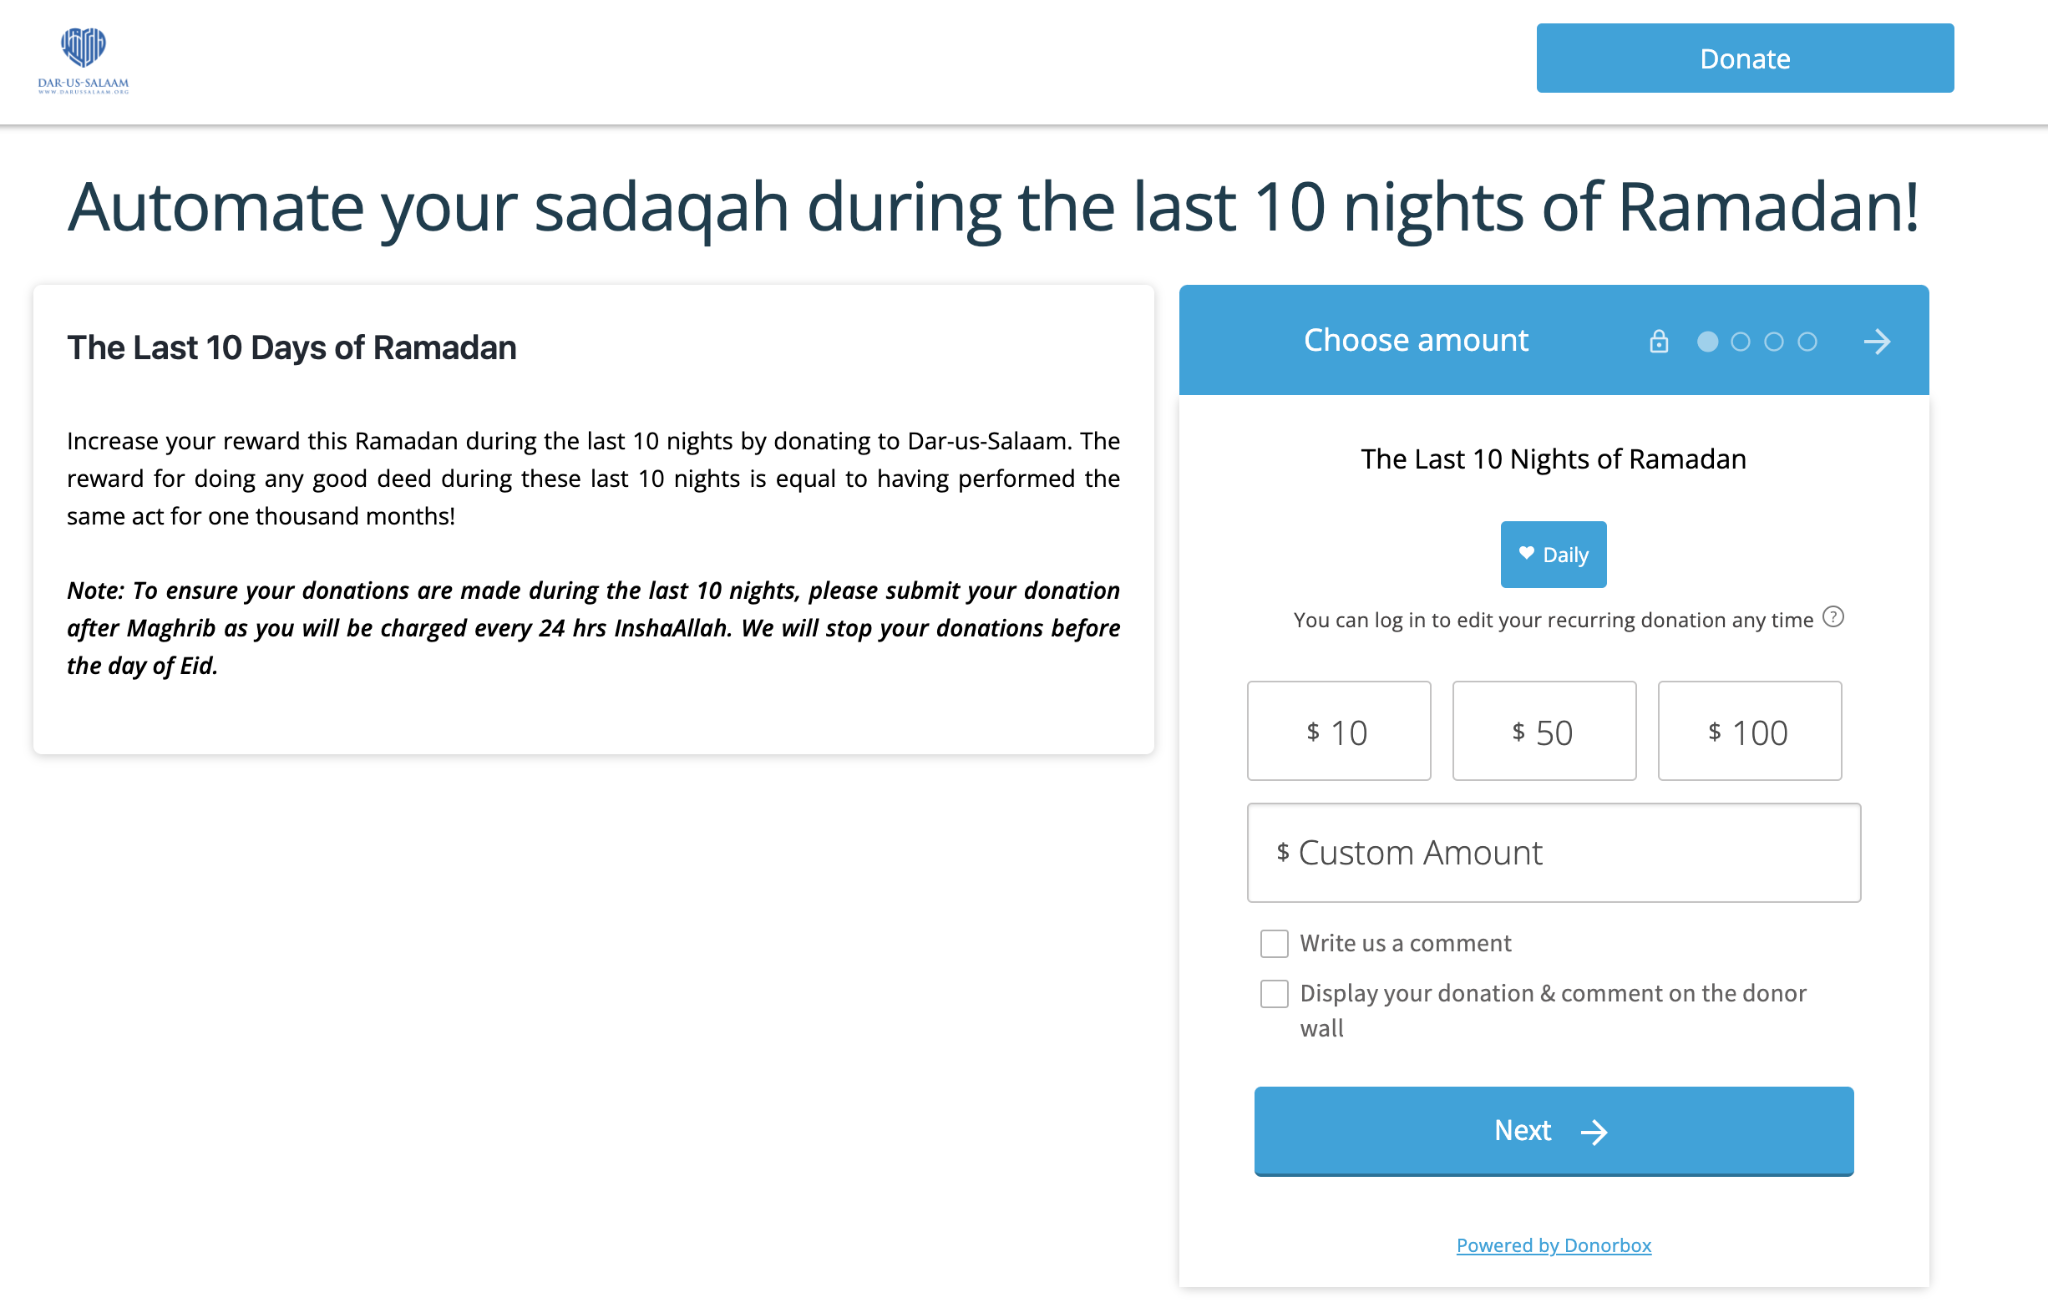 Screenshot of an Islamic charity's Donorbox fundraising page for the last 10 nights of Ramadan. 